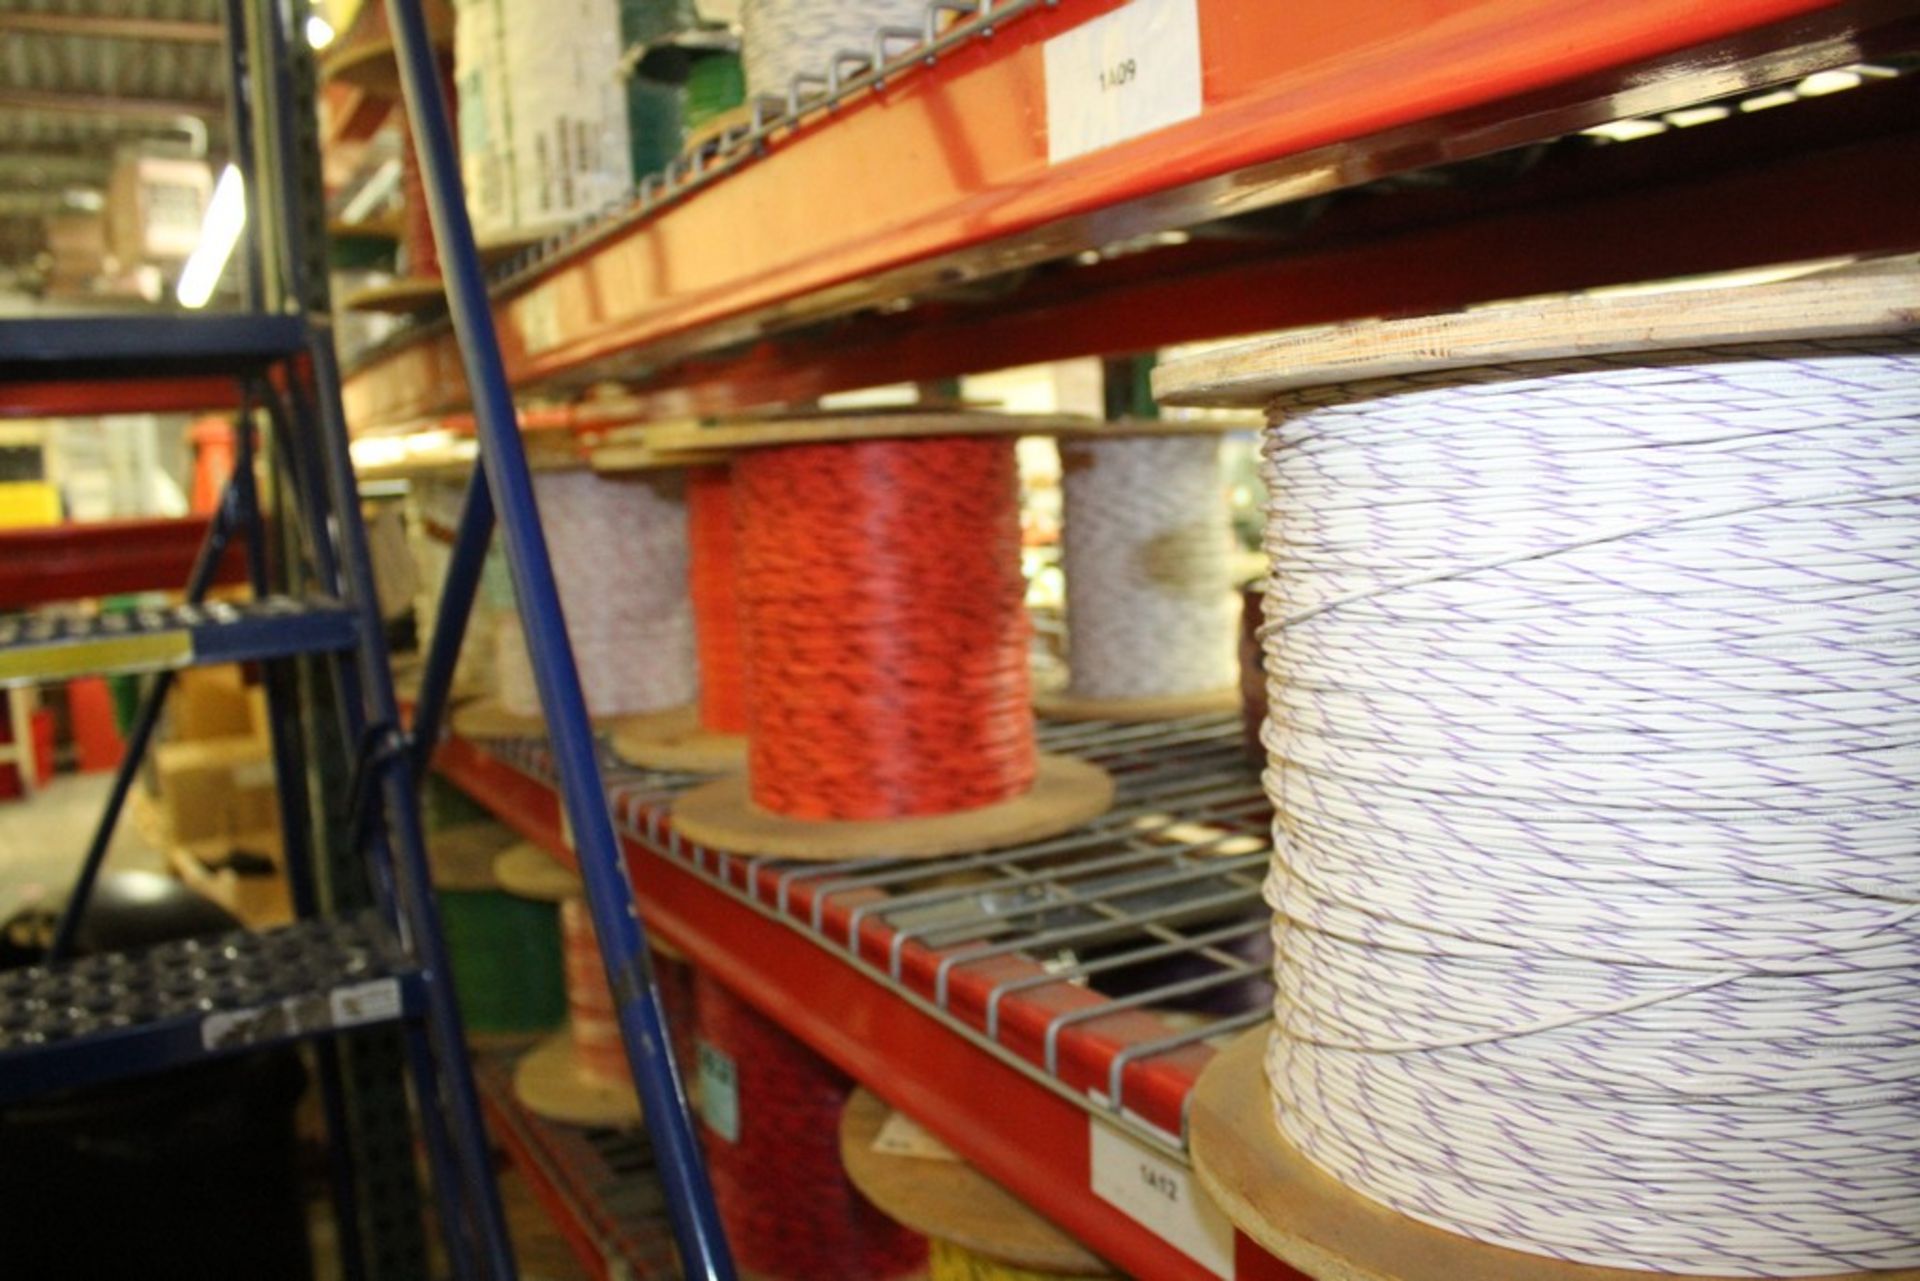 ASSORTED WIRE SPOOLS ON SHELF